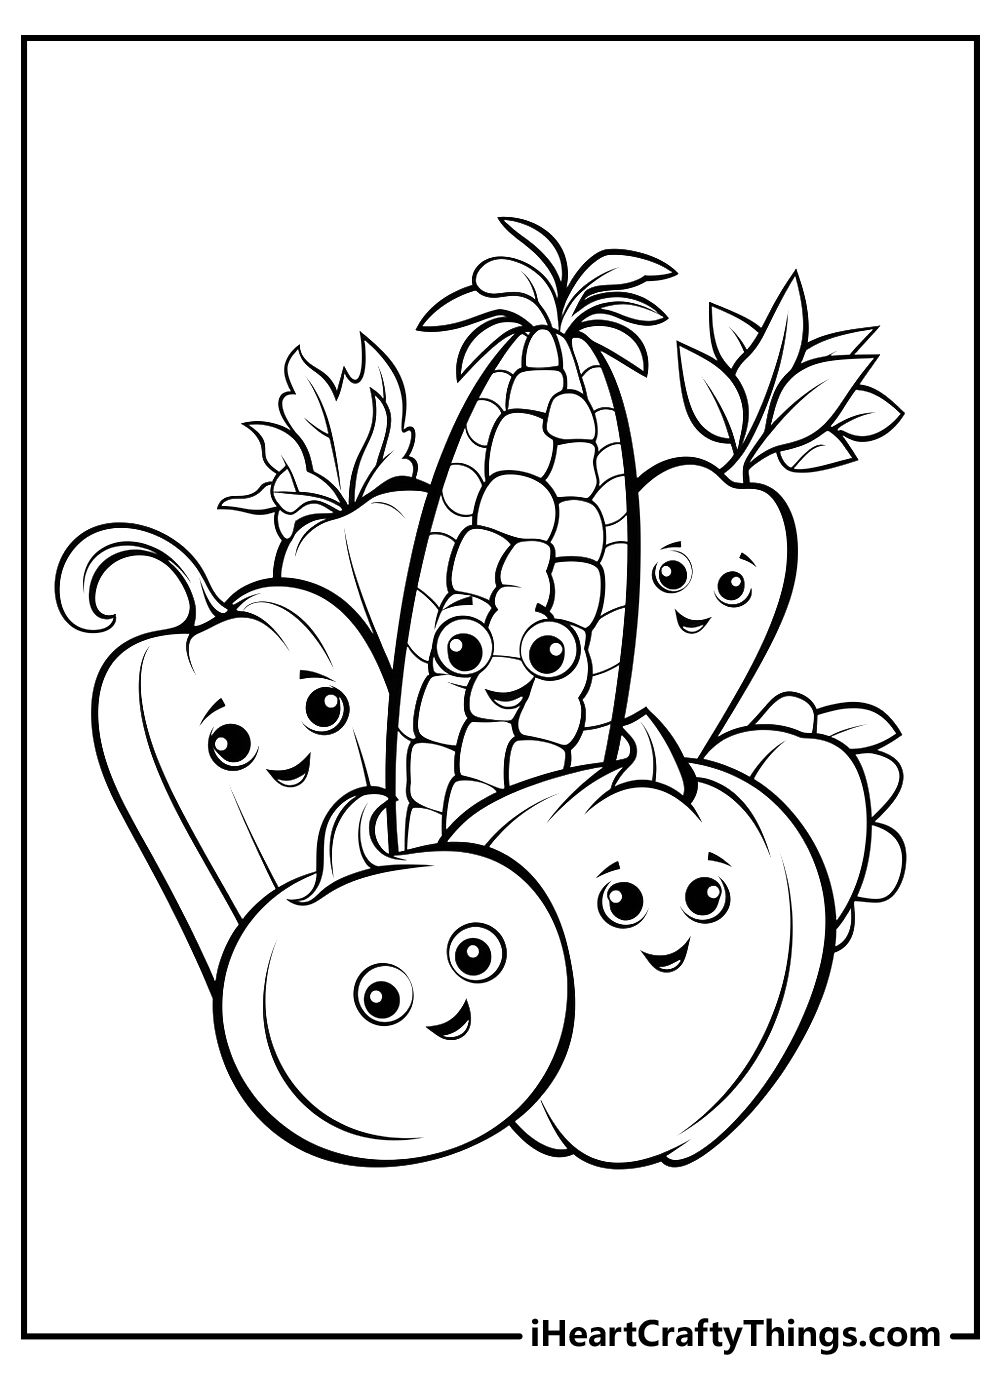 Vegetables coloring pages free printables